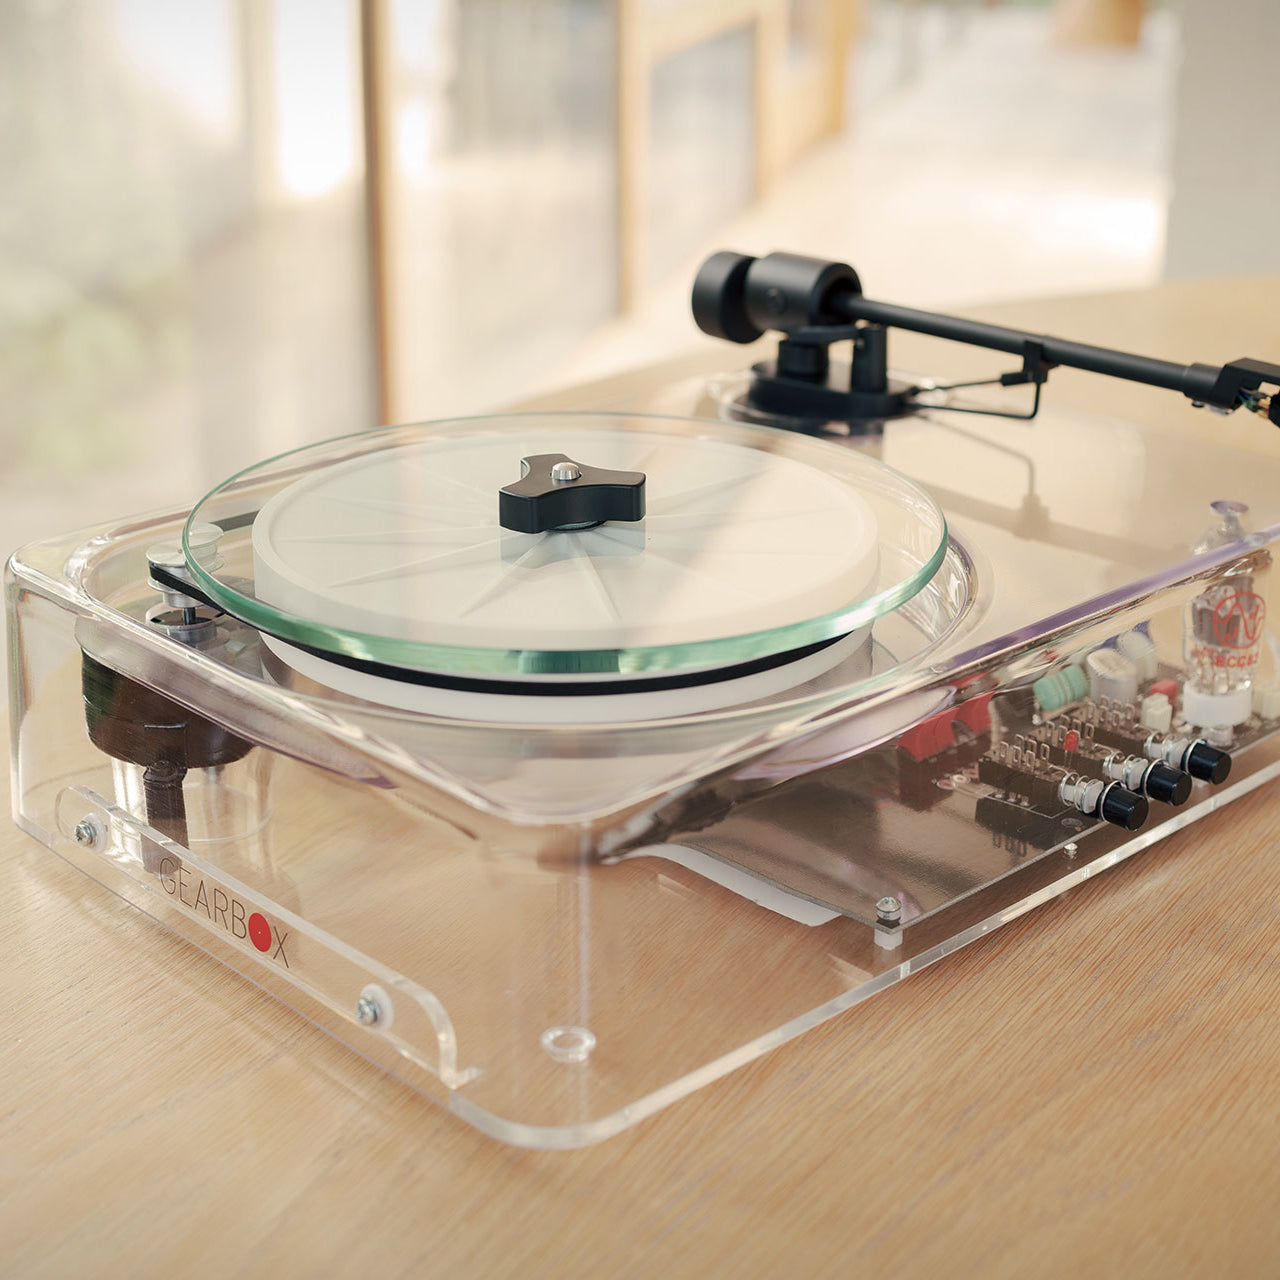 Gearbox Transparent Turntable